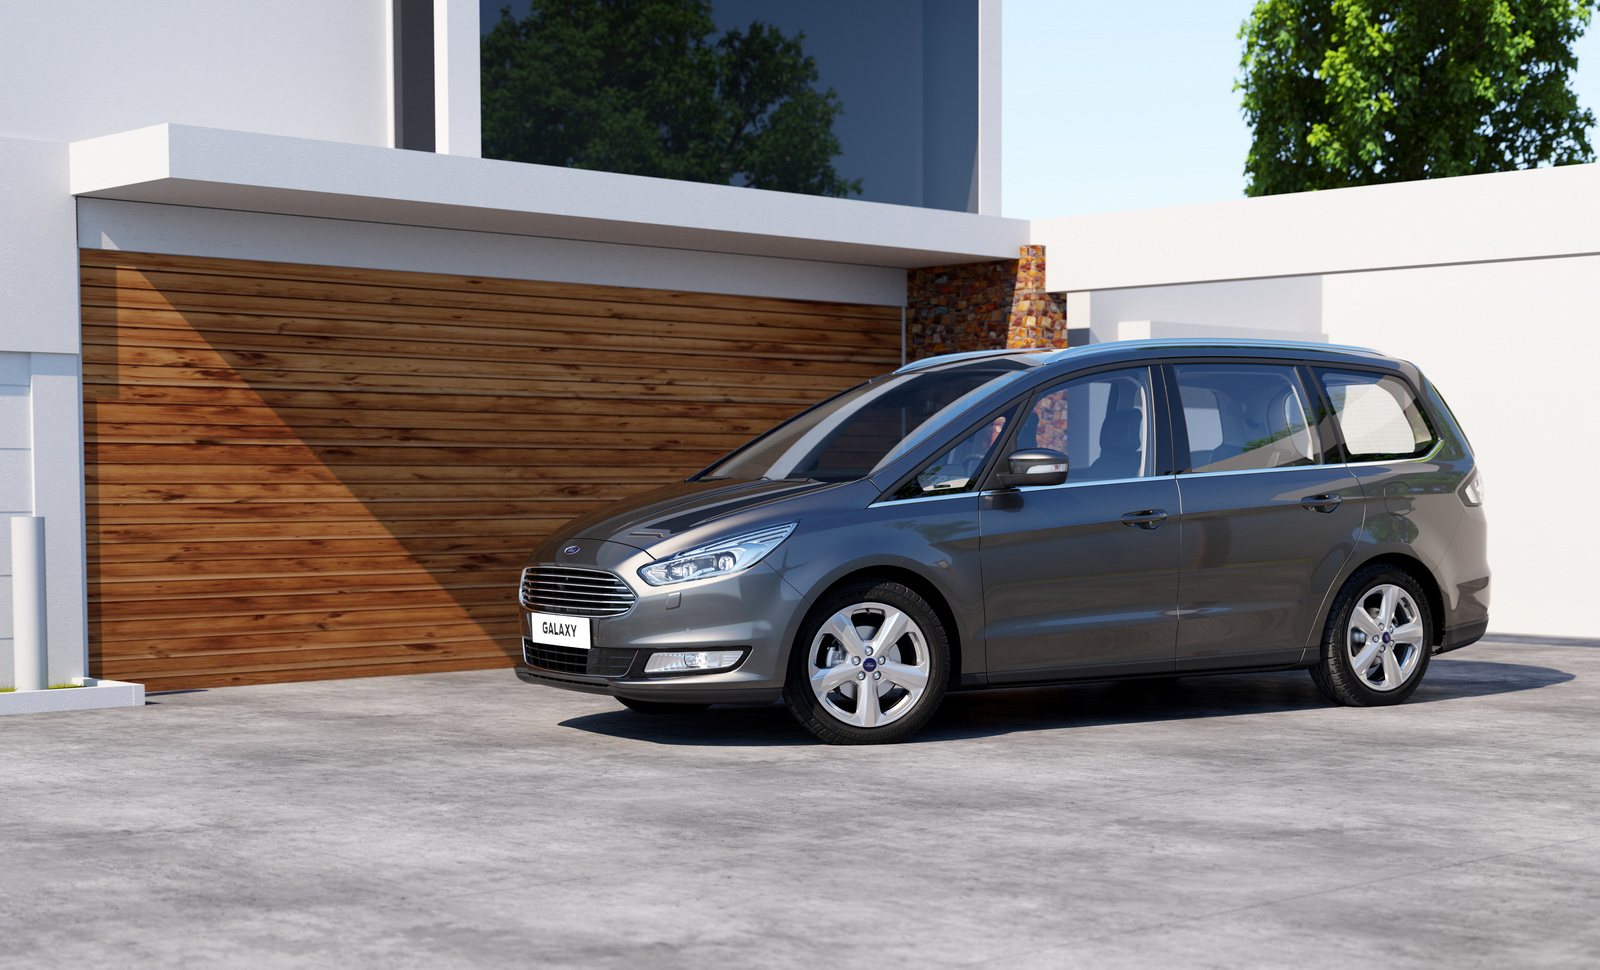 All-New Ford Galaxy Available With AWD, Priced From £26,445 In The UK,  €32,810 in Germany